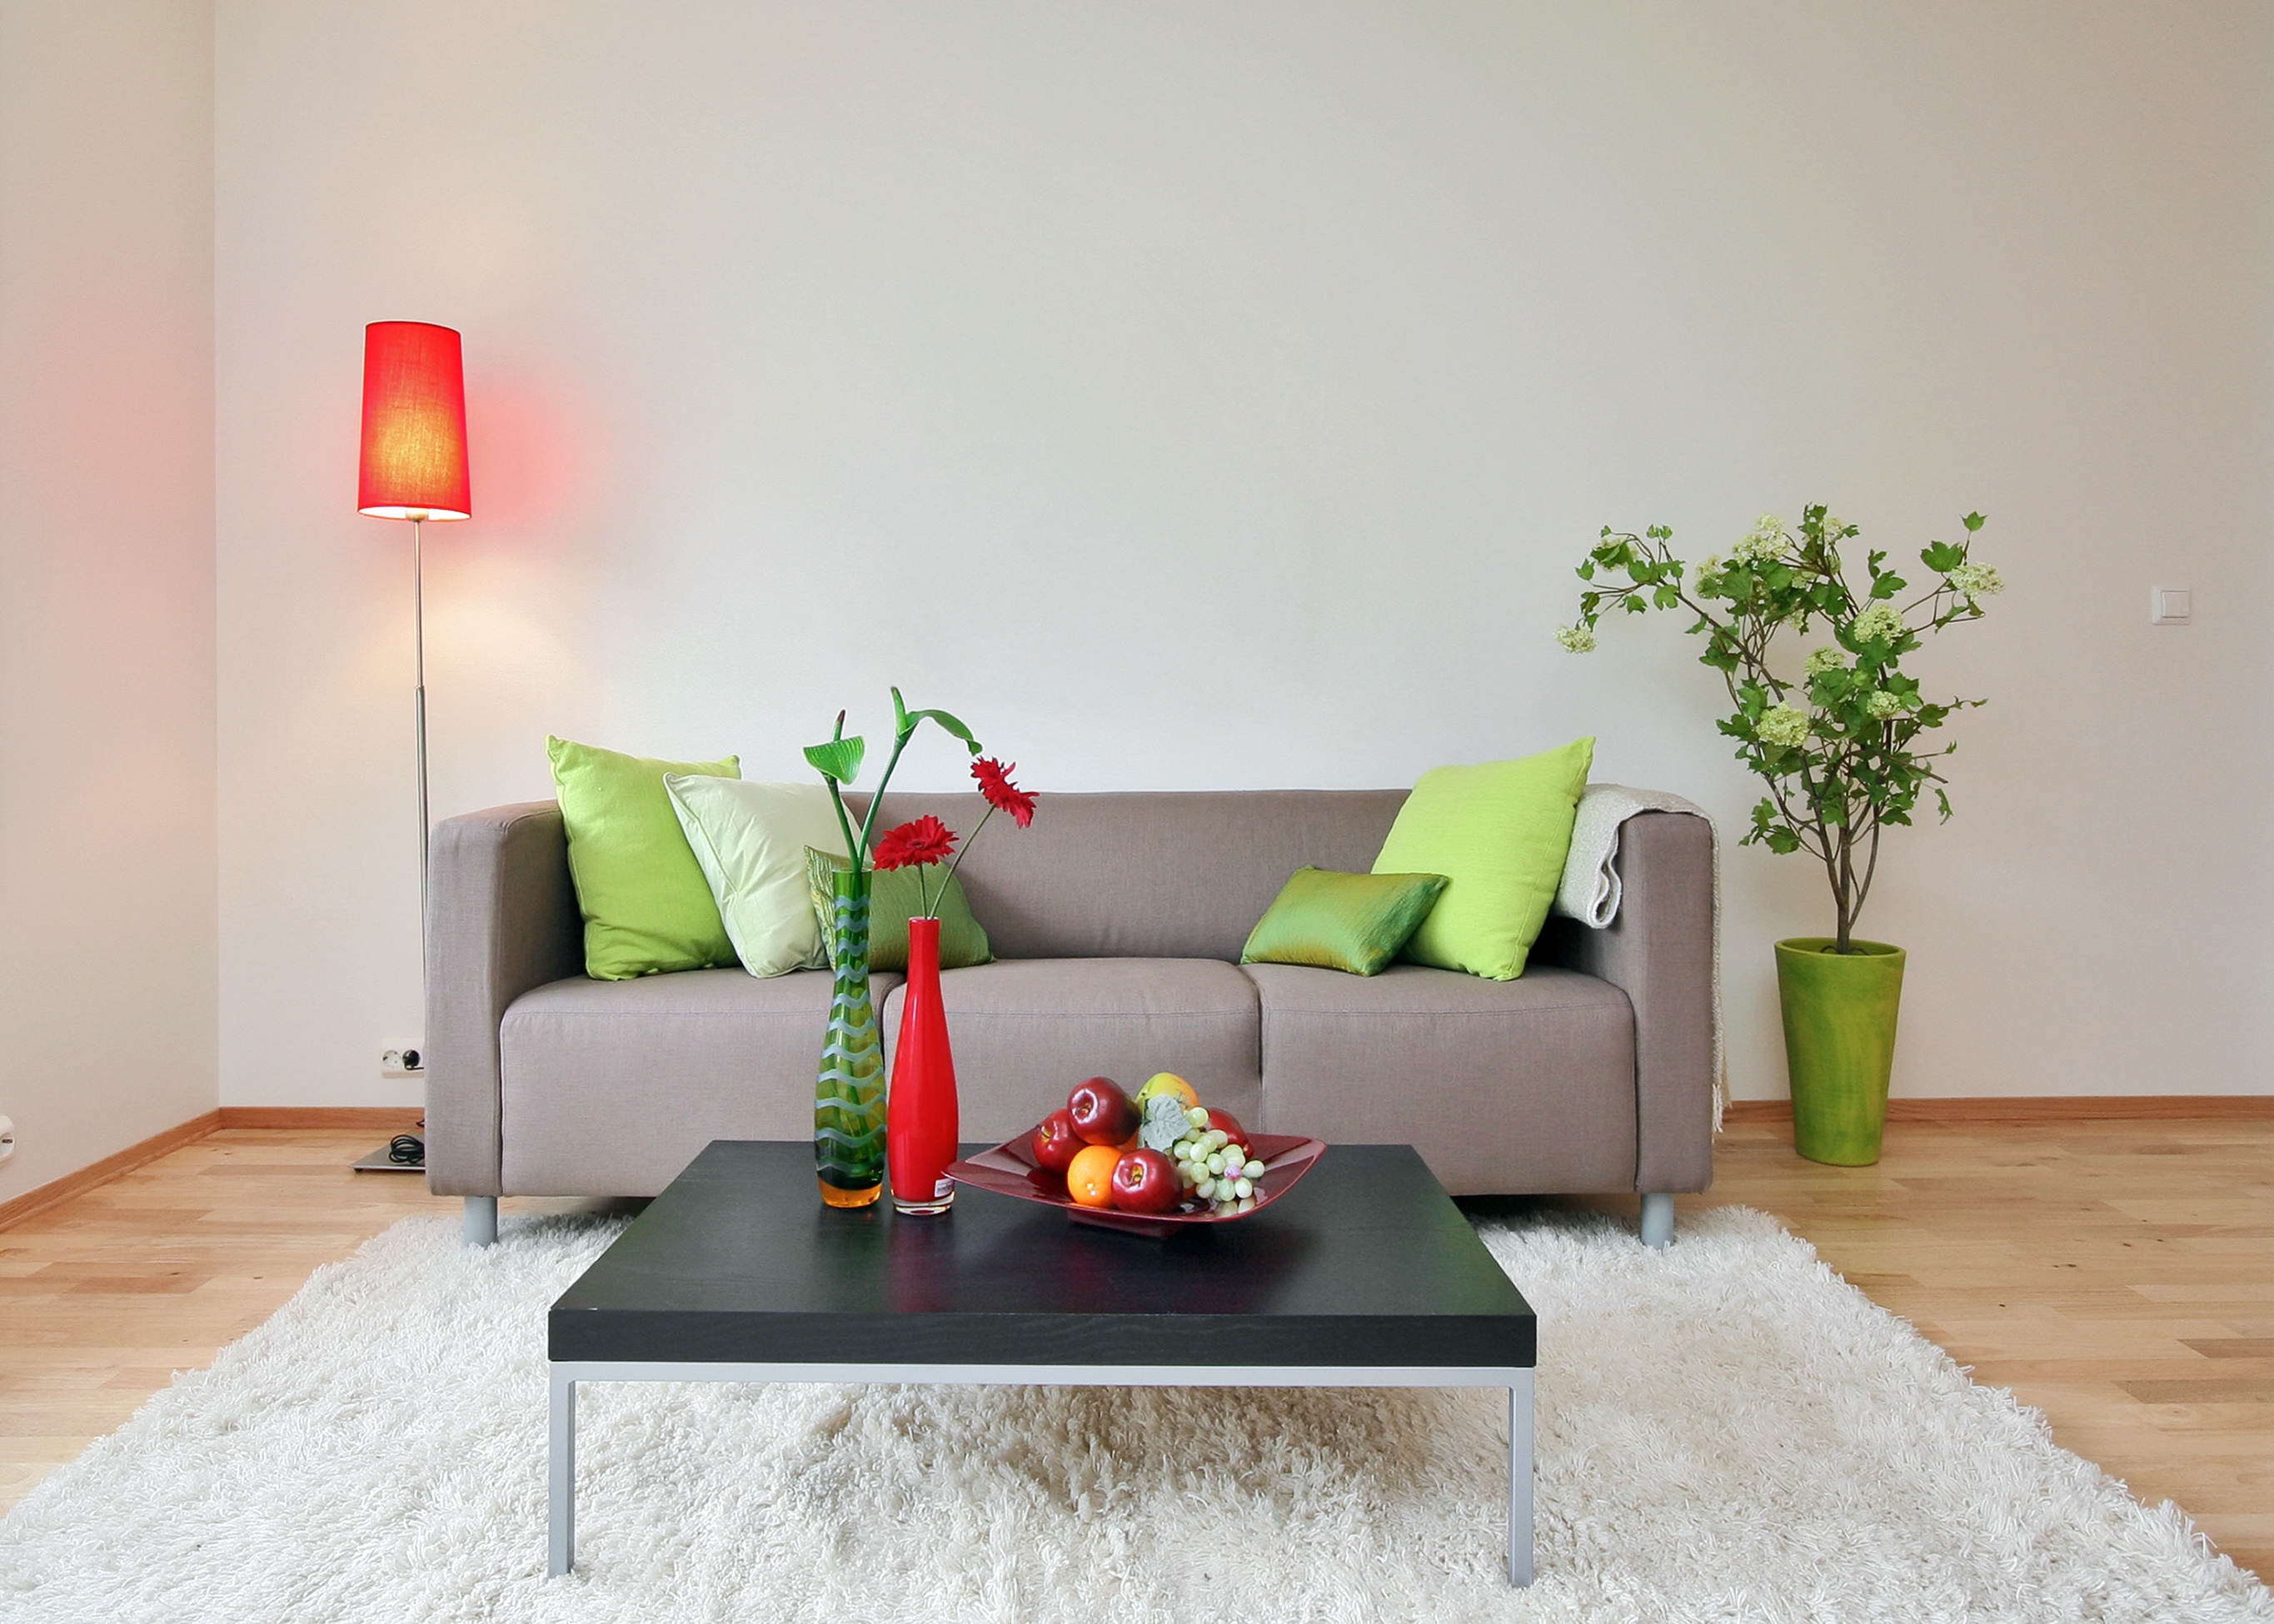 table, fruits, flowers, miscellanea, miscellaneous, living room, carpet Full HD